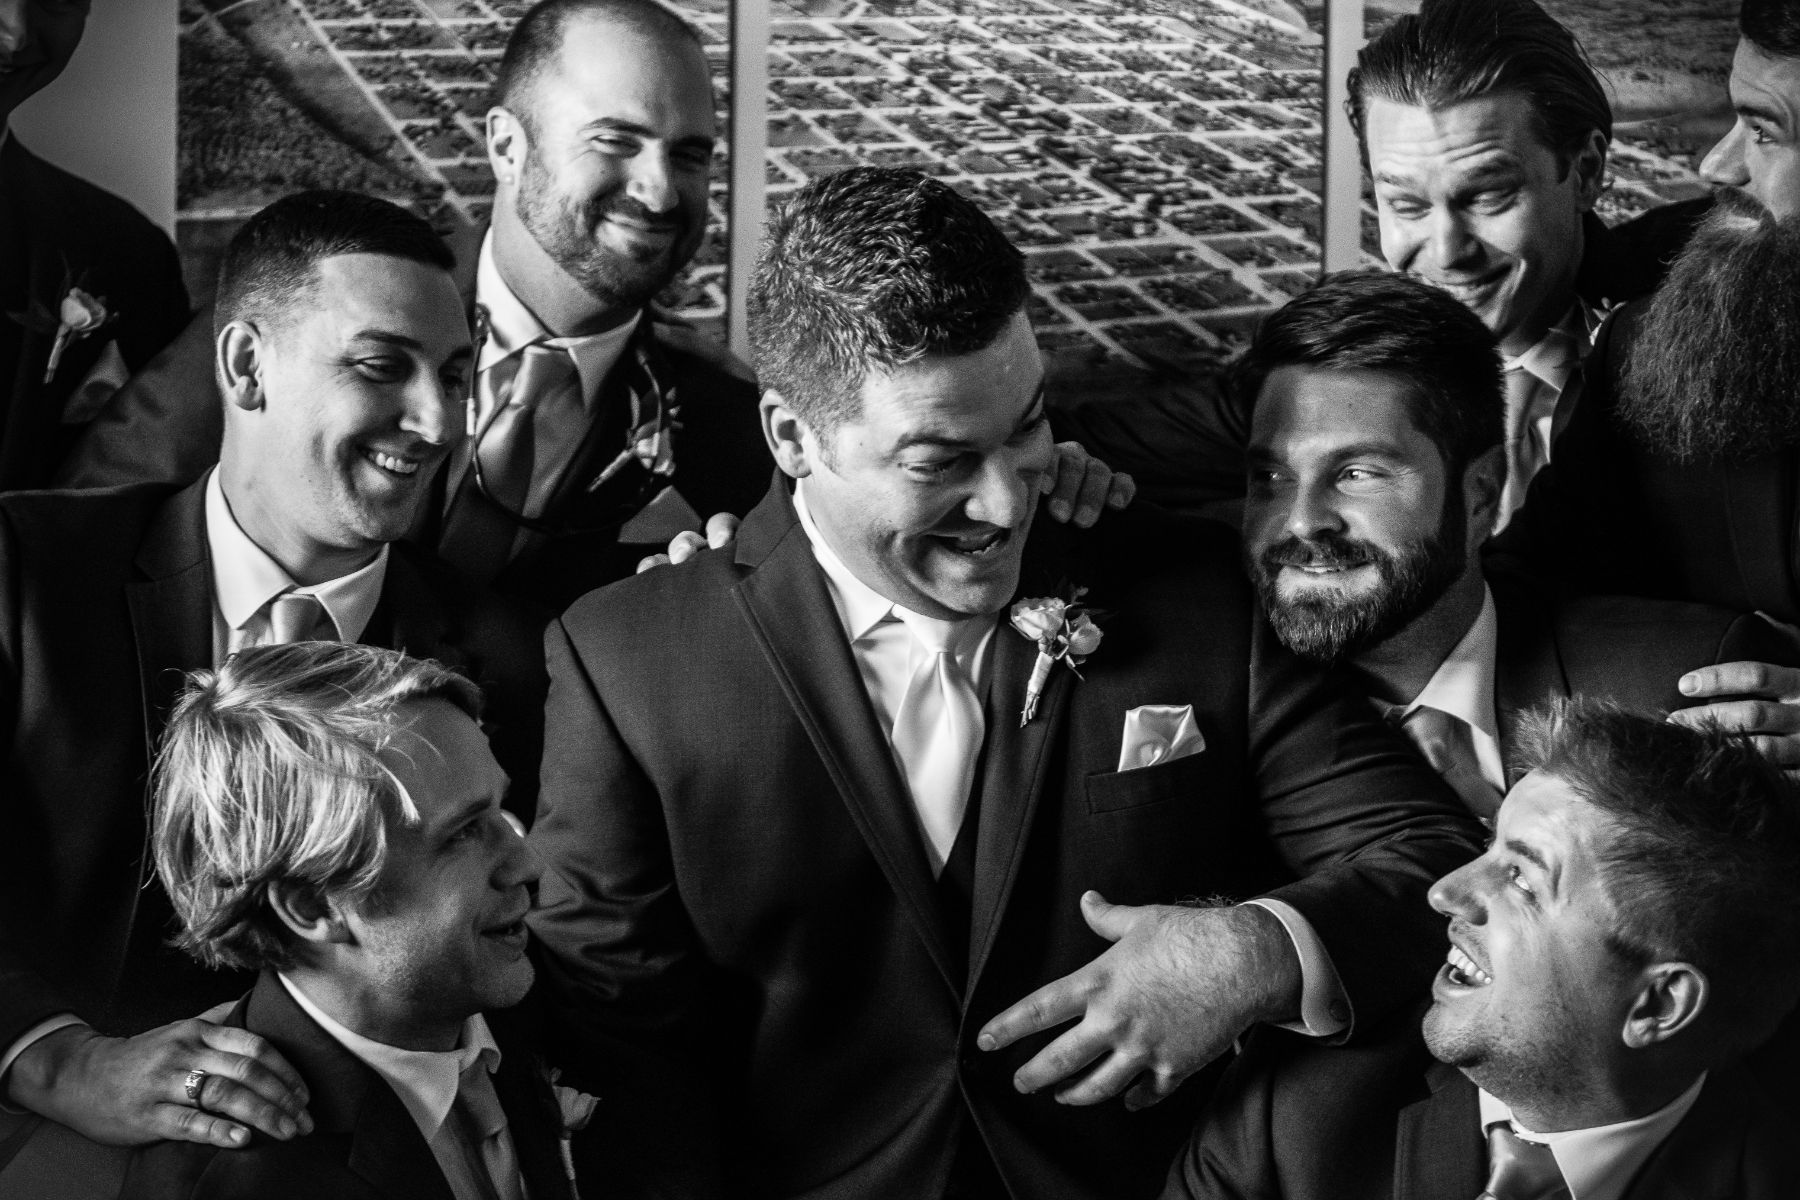 A groom is surrounded by his groomsmen, who are cheering and smiling at him.